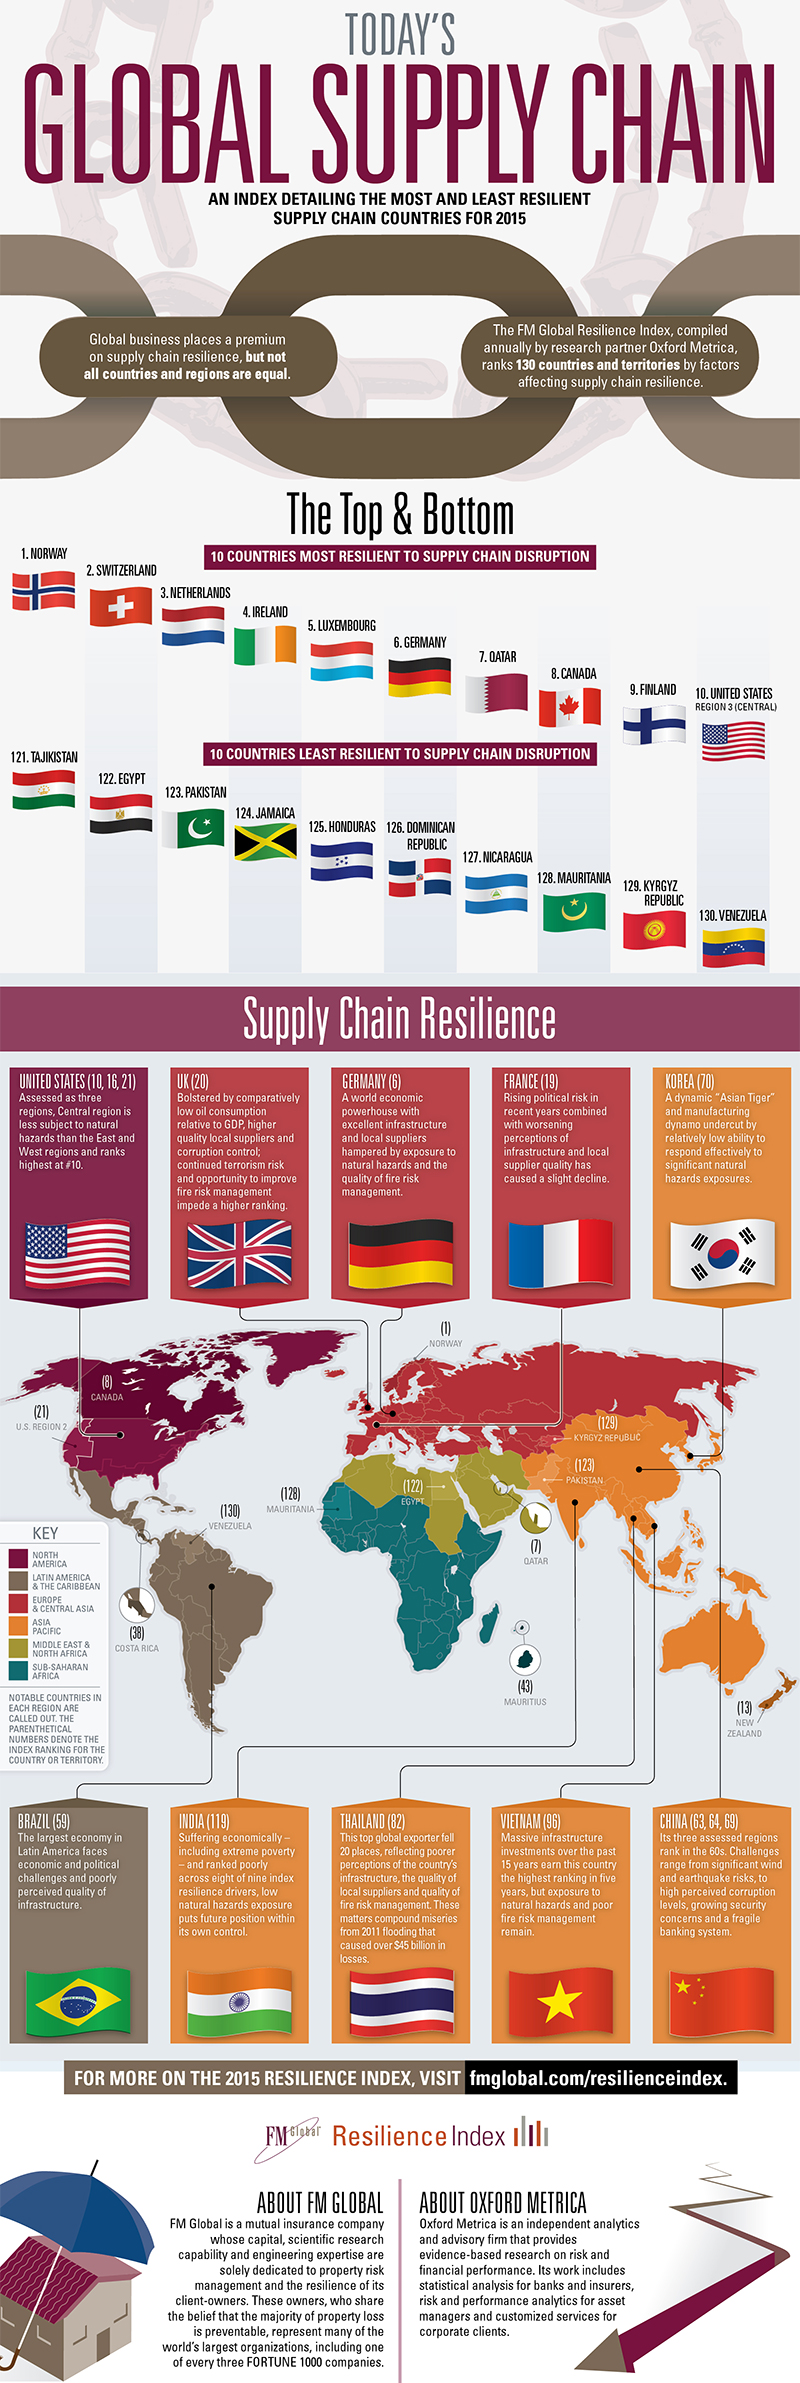 Countries That Have the Most Resilient Supply Chains - Supply Chain 24/7